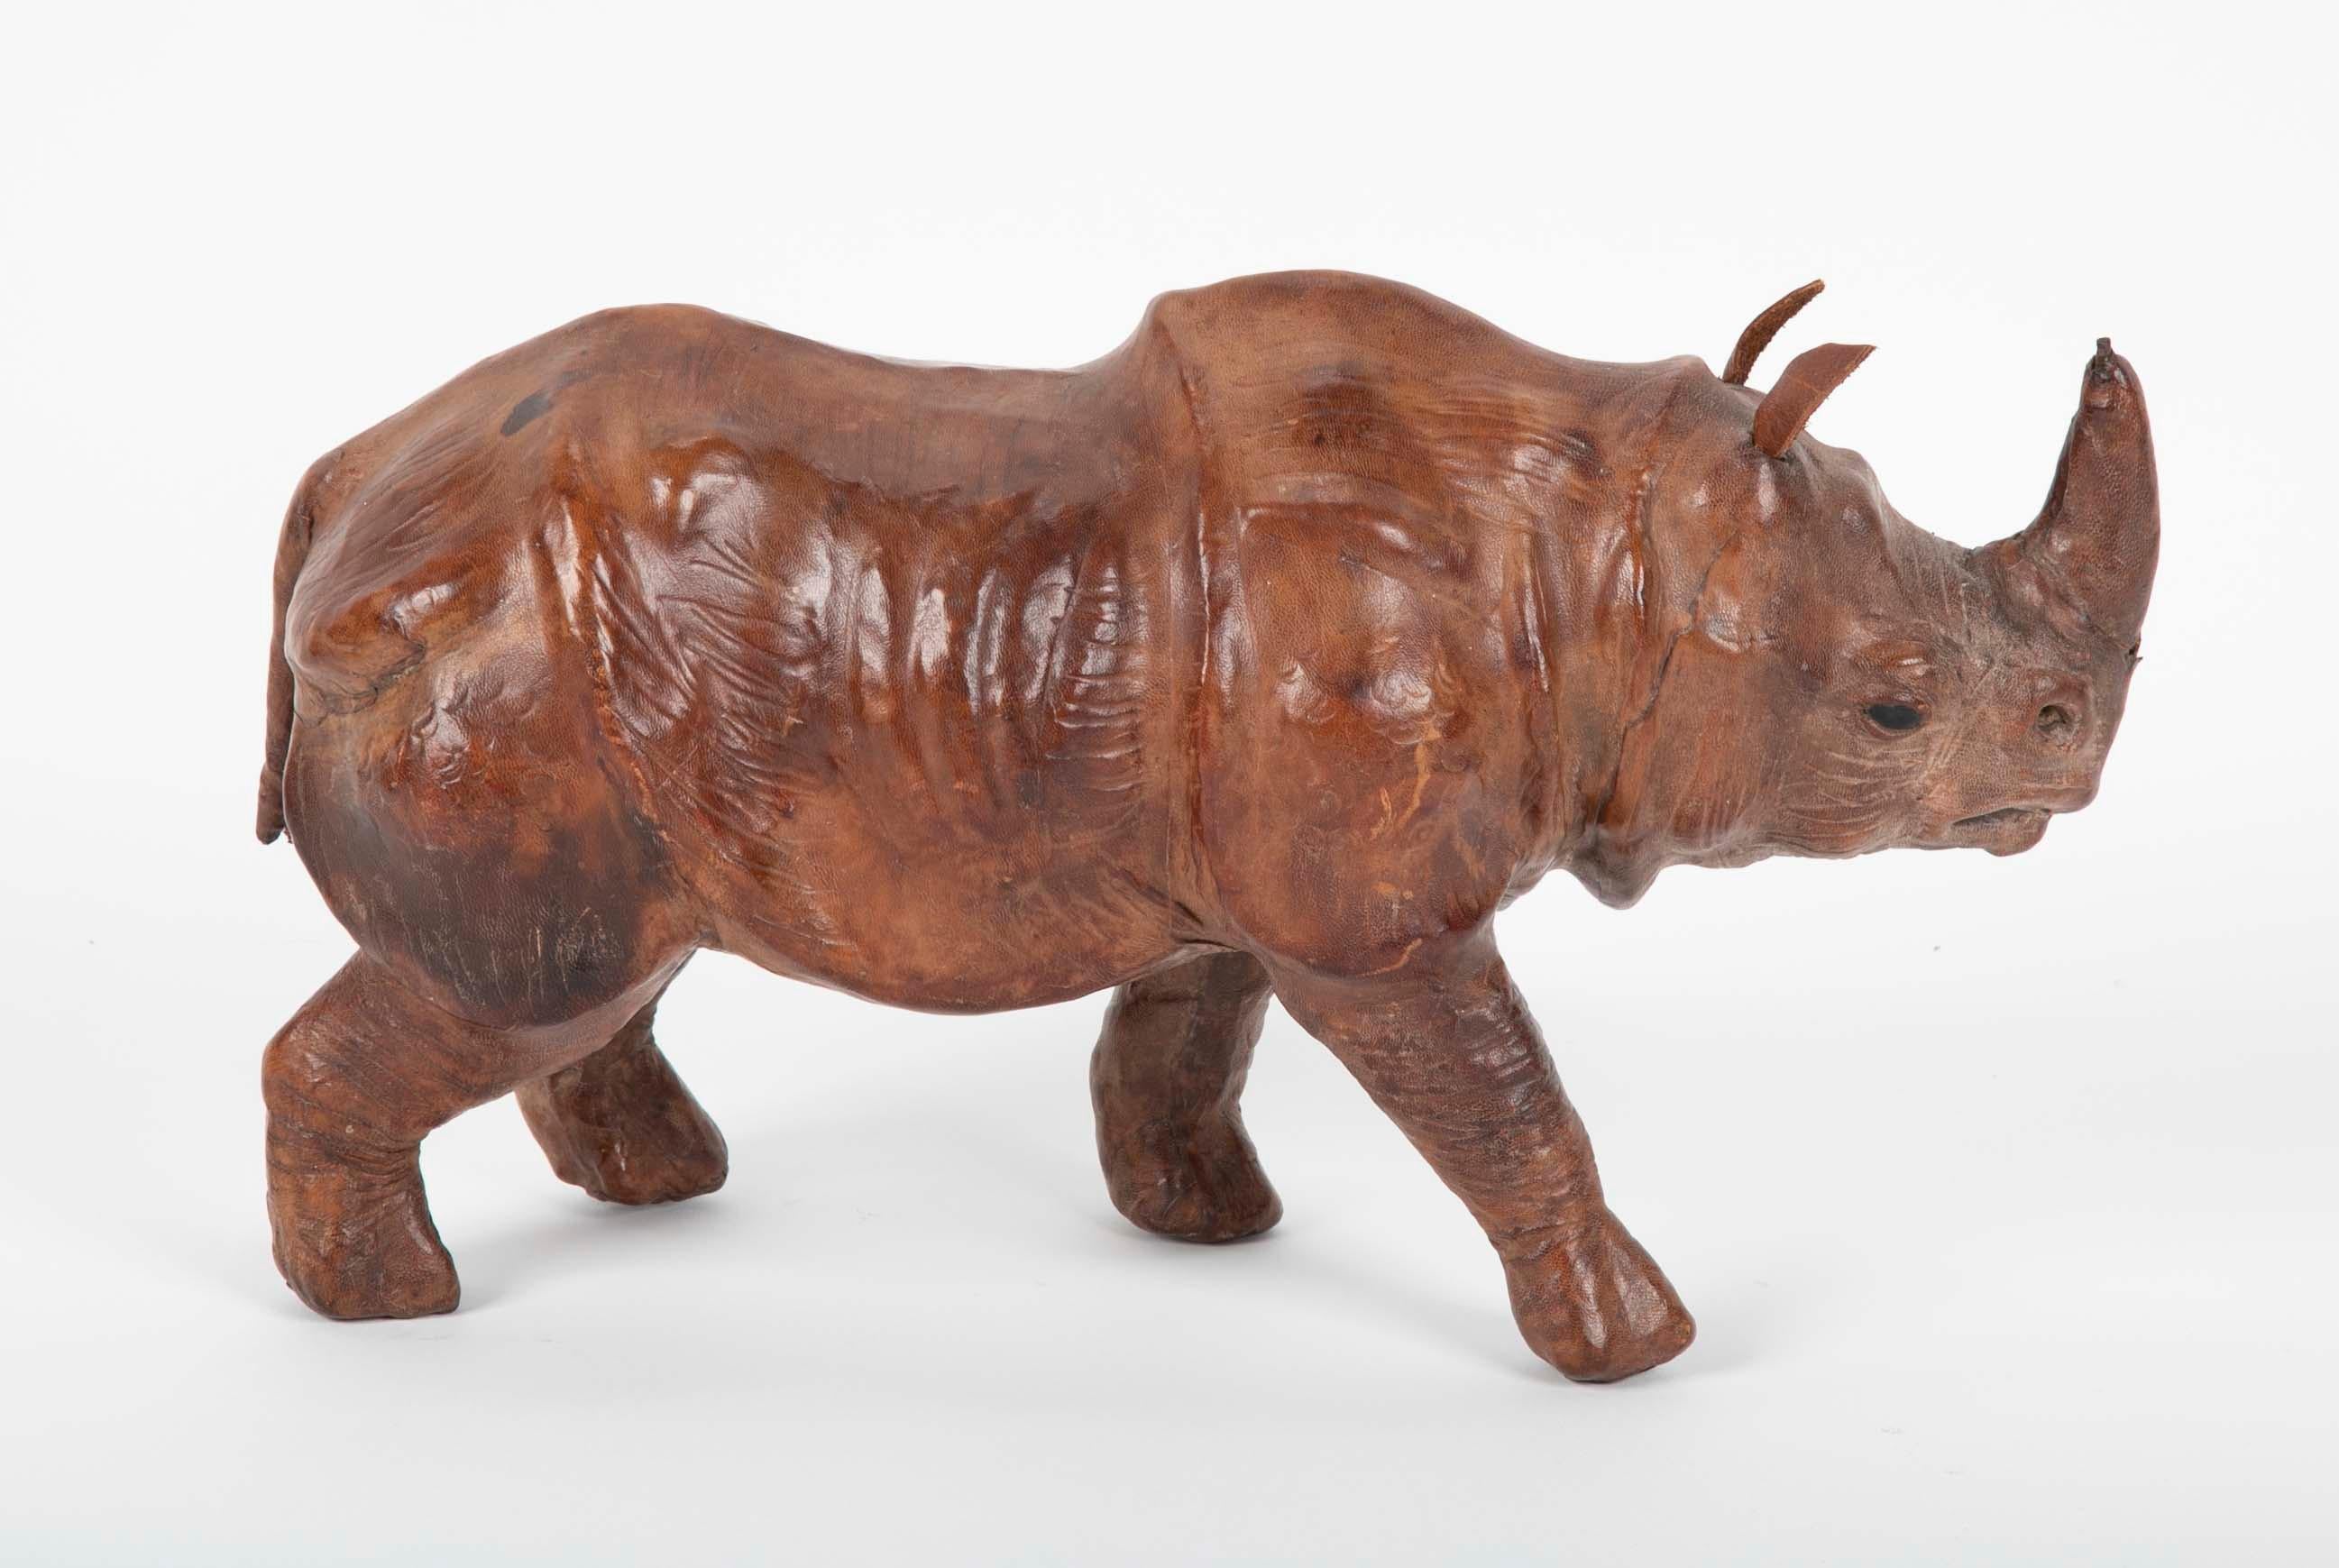 An very detailed leather clad model of a rhinoceros. With glass eyes and realistic features, a miniature version of a live rhino. The leather work is amazing.